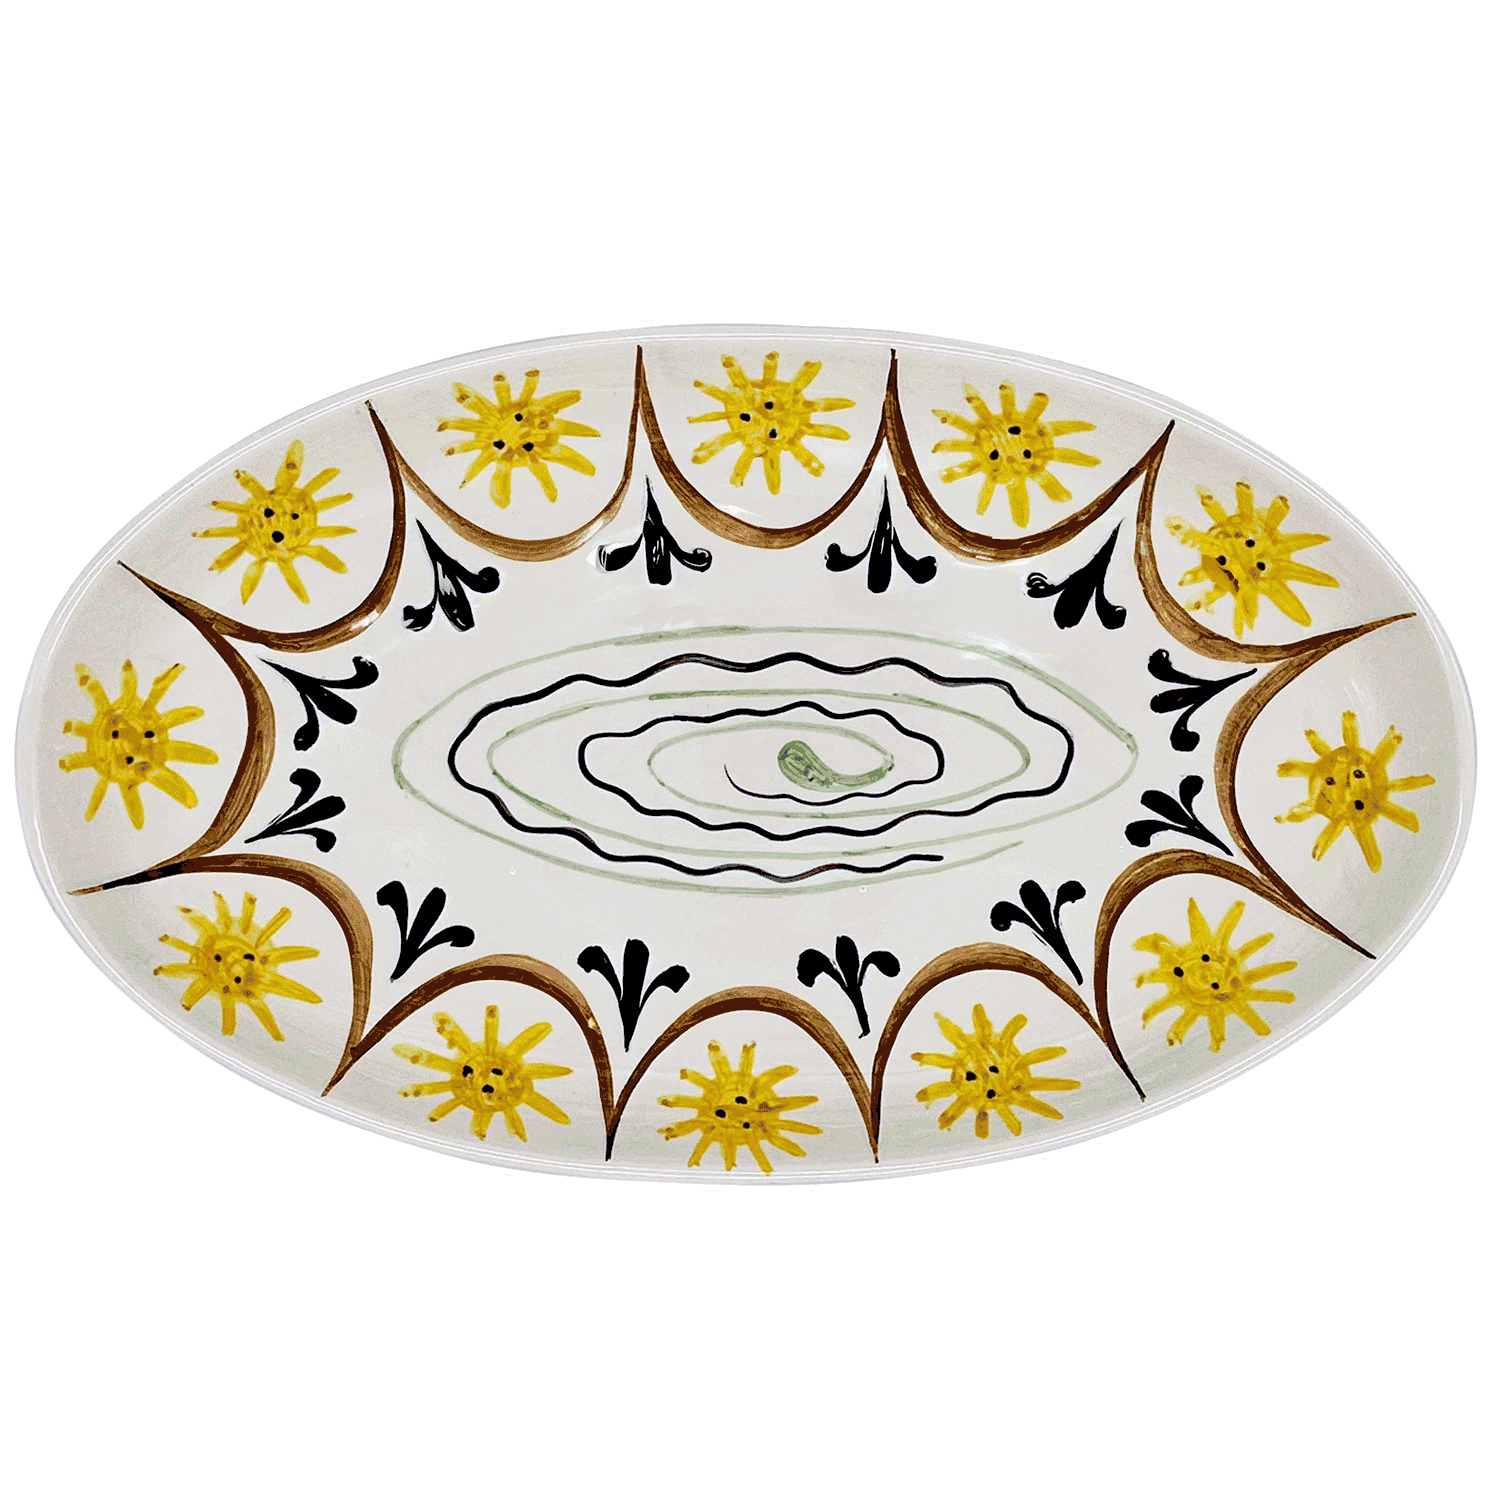 Collagerie X Villa Bologna Pottery Large Scalloped Oval Platter